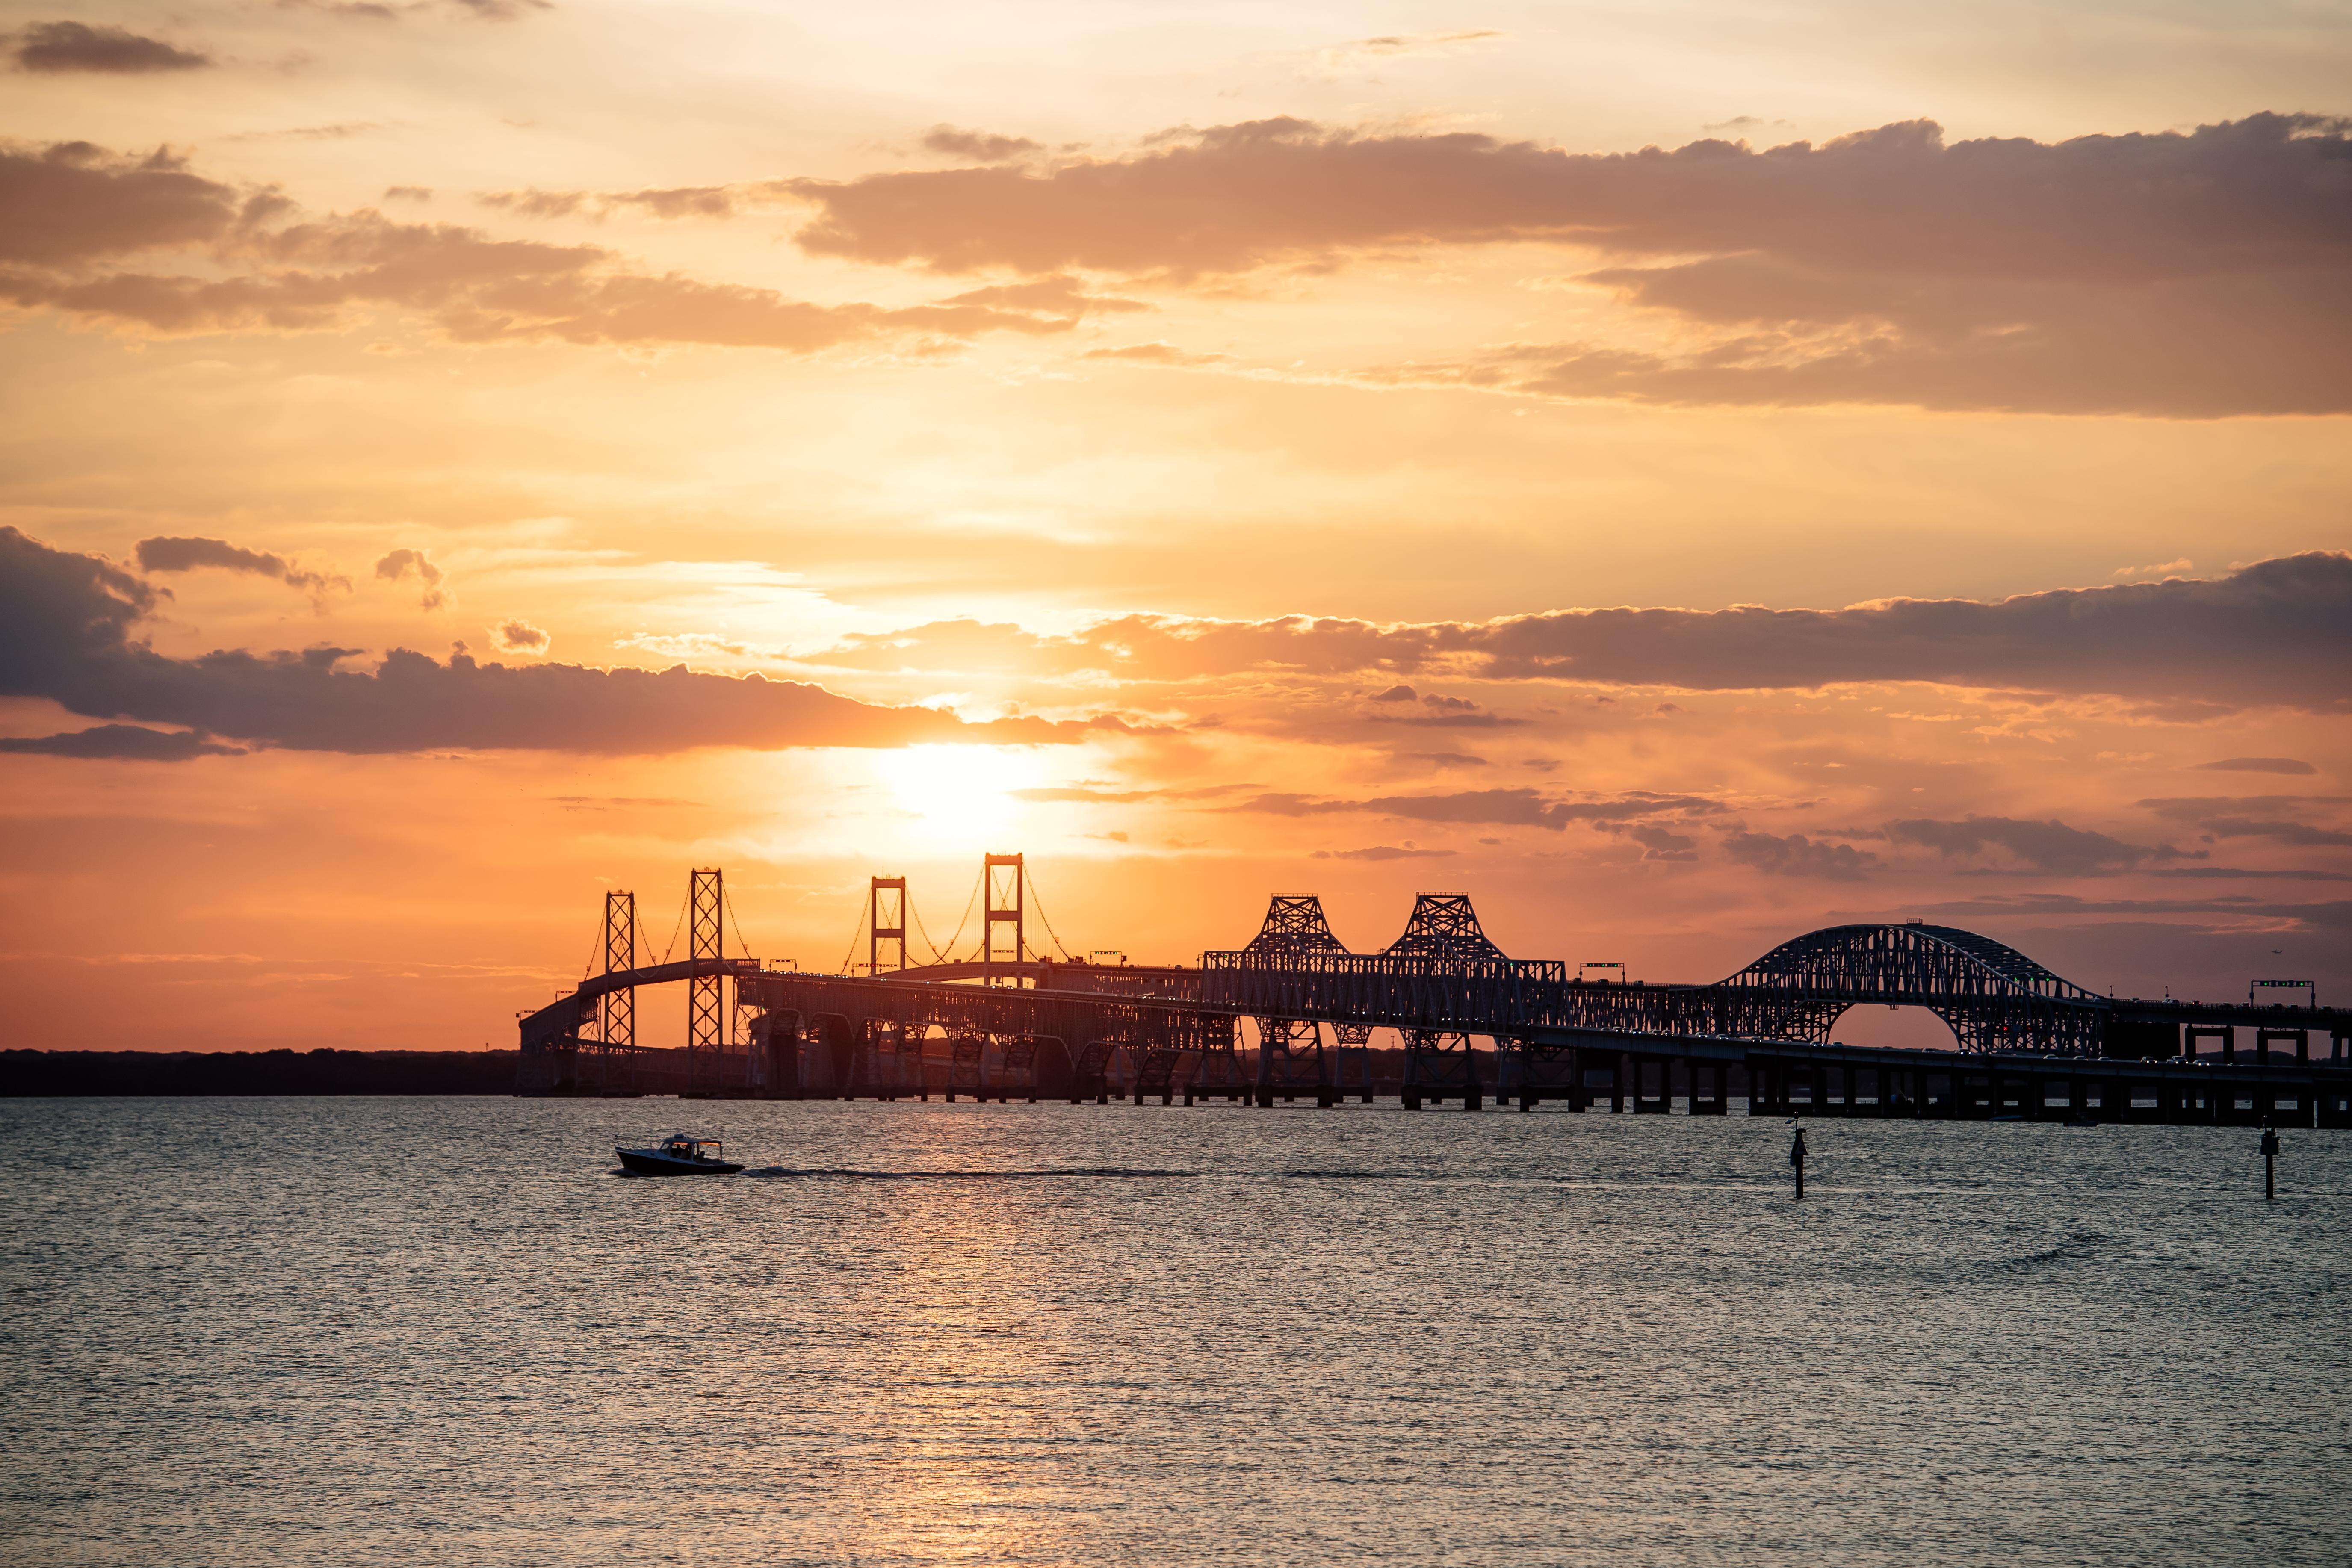 View of the Chesapeake Bay Bridge at sunset from Libbey's Coastal Kitchen